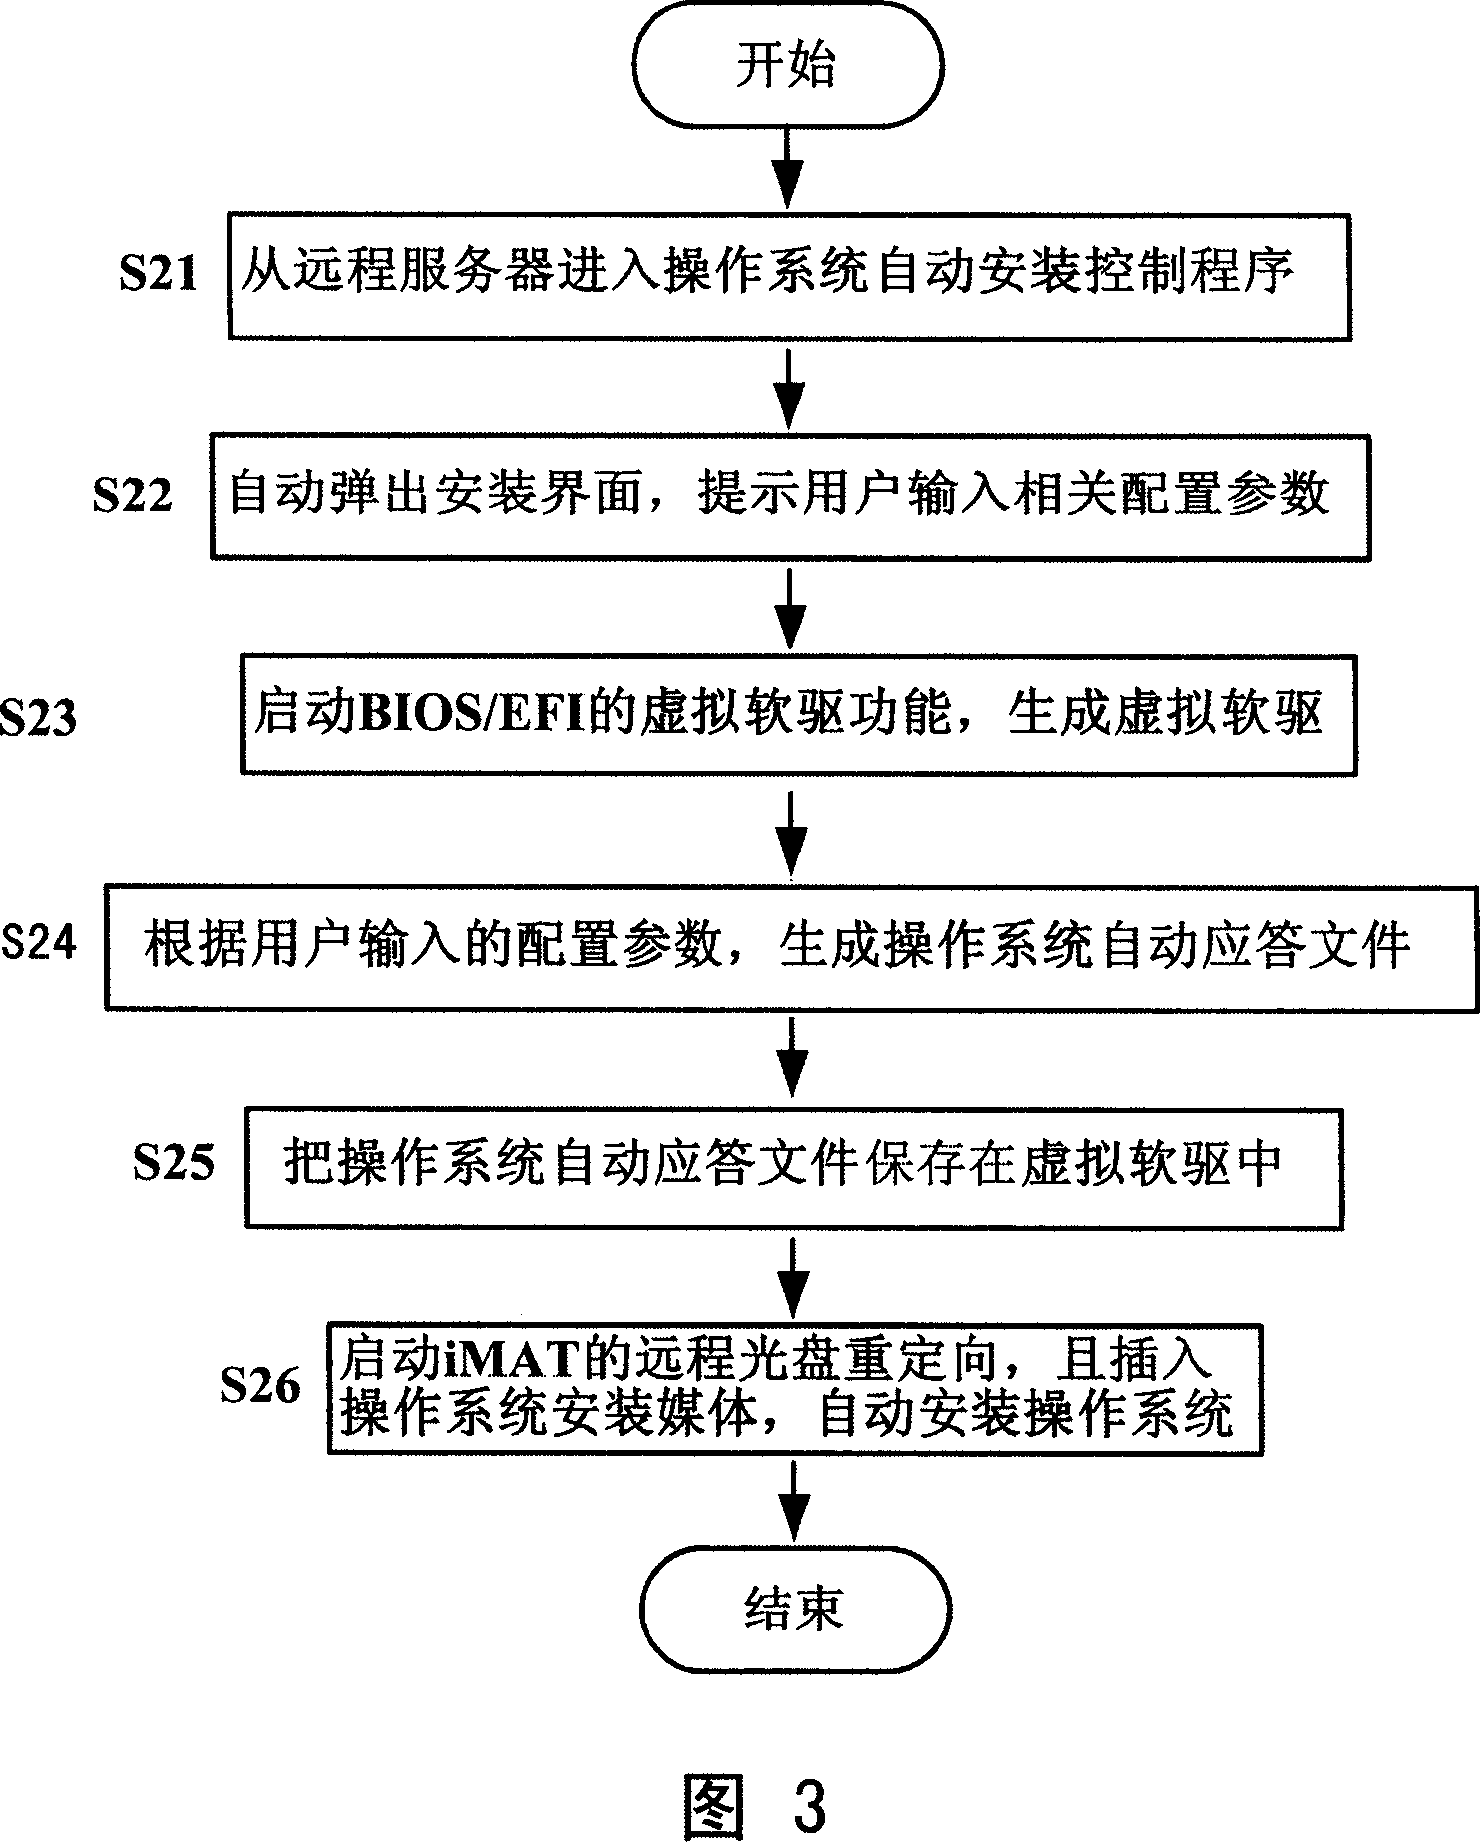 Method for automatically installing operating system